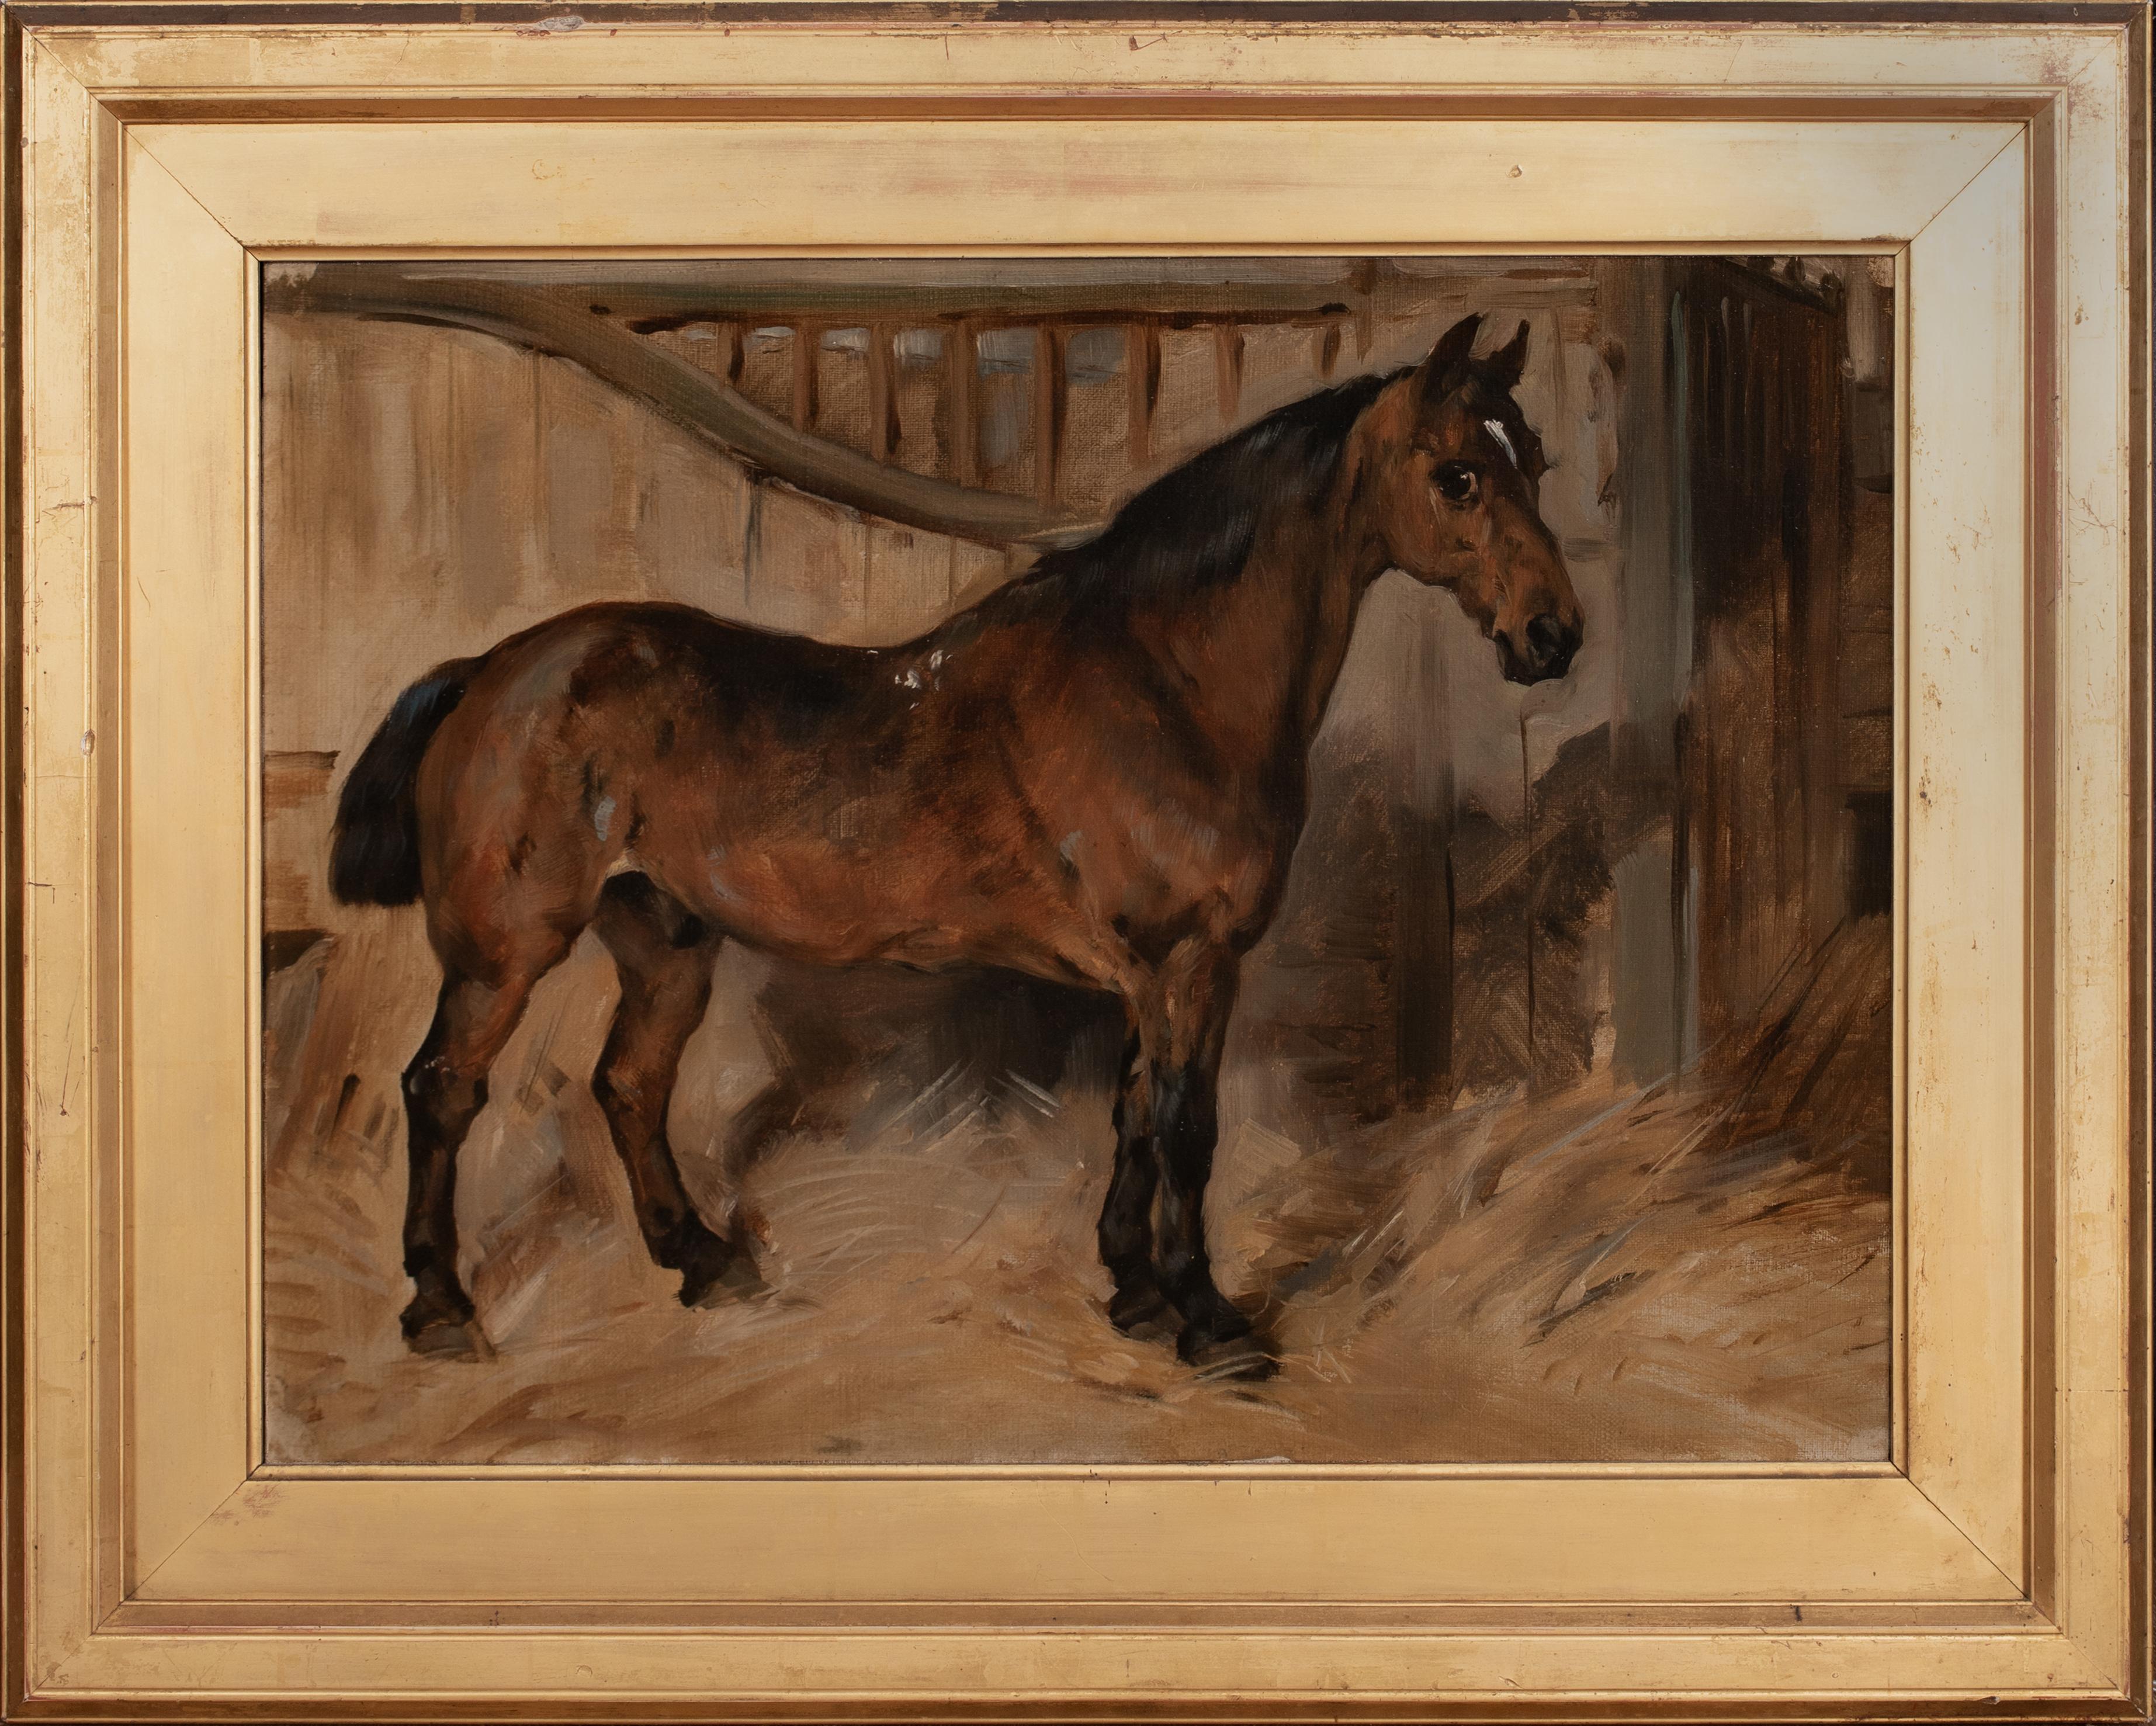 John Emms Animal Painting - Large 19th Century Portrait Of A Bay Carriage Horse, 19th Century  by JOHN EMMS 